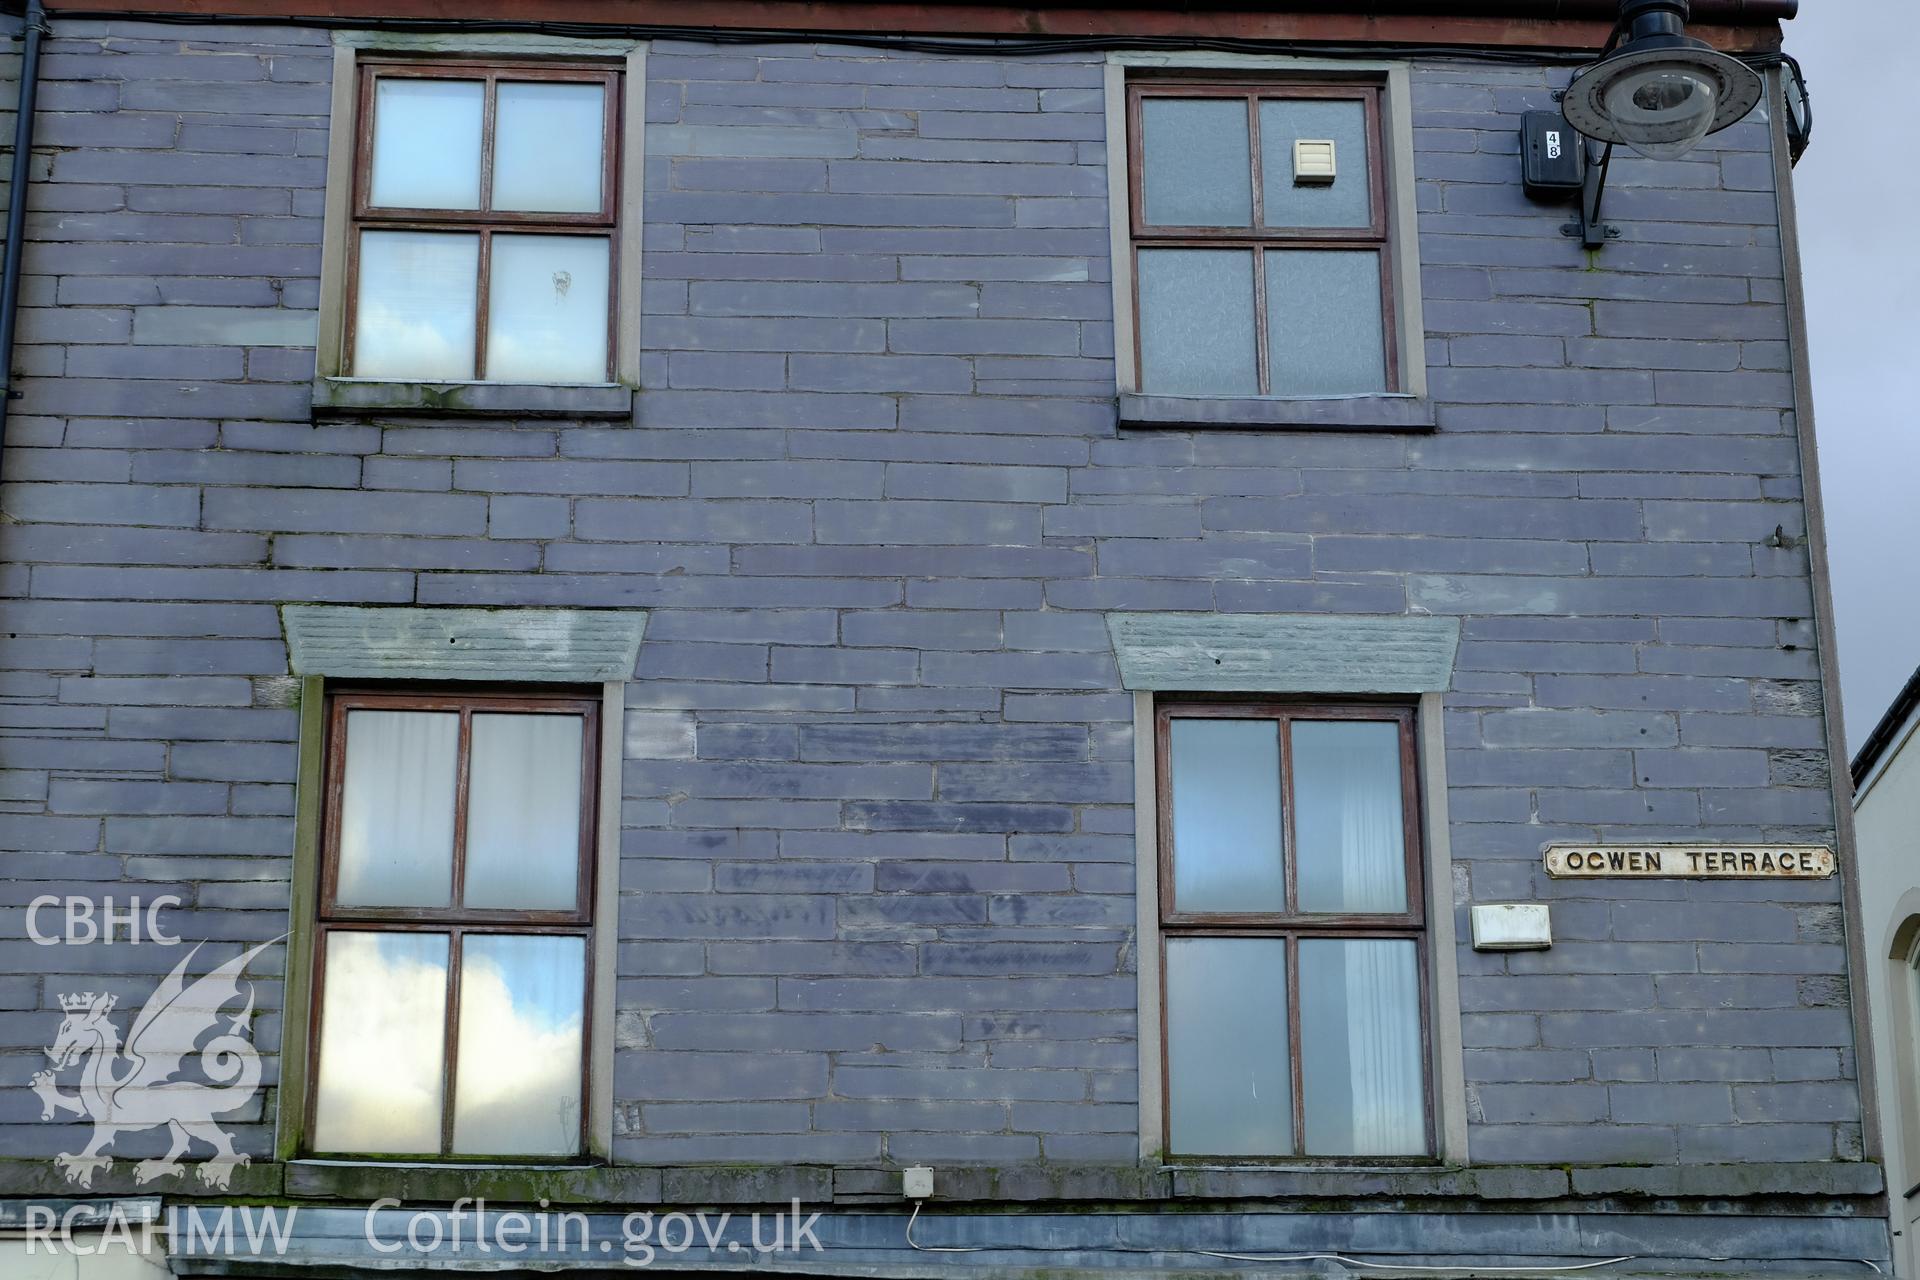 Colour photograph showing view of the fa?ade at first and second floor levels of 1 Ogwen Terrace, Bethesda, produced by Richard Hayman 2nd February 2017